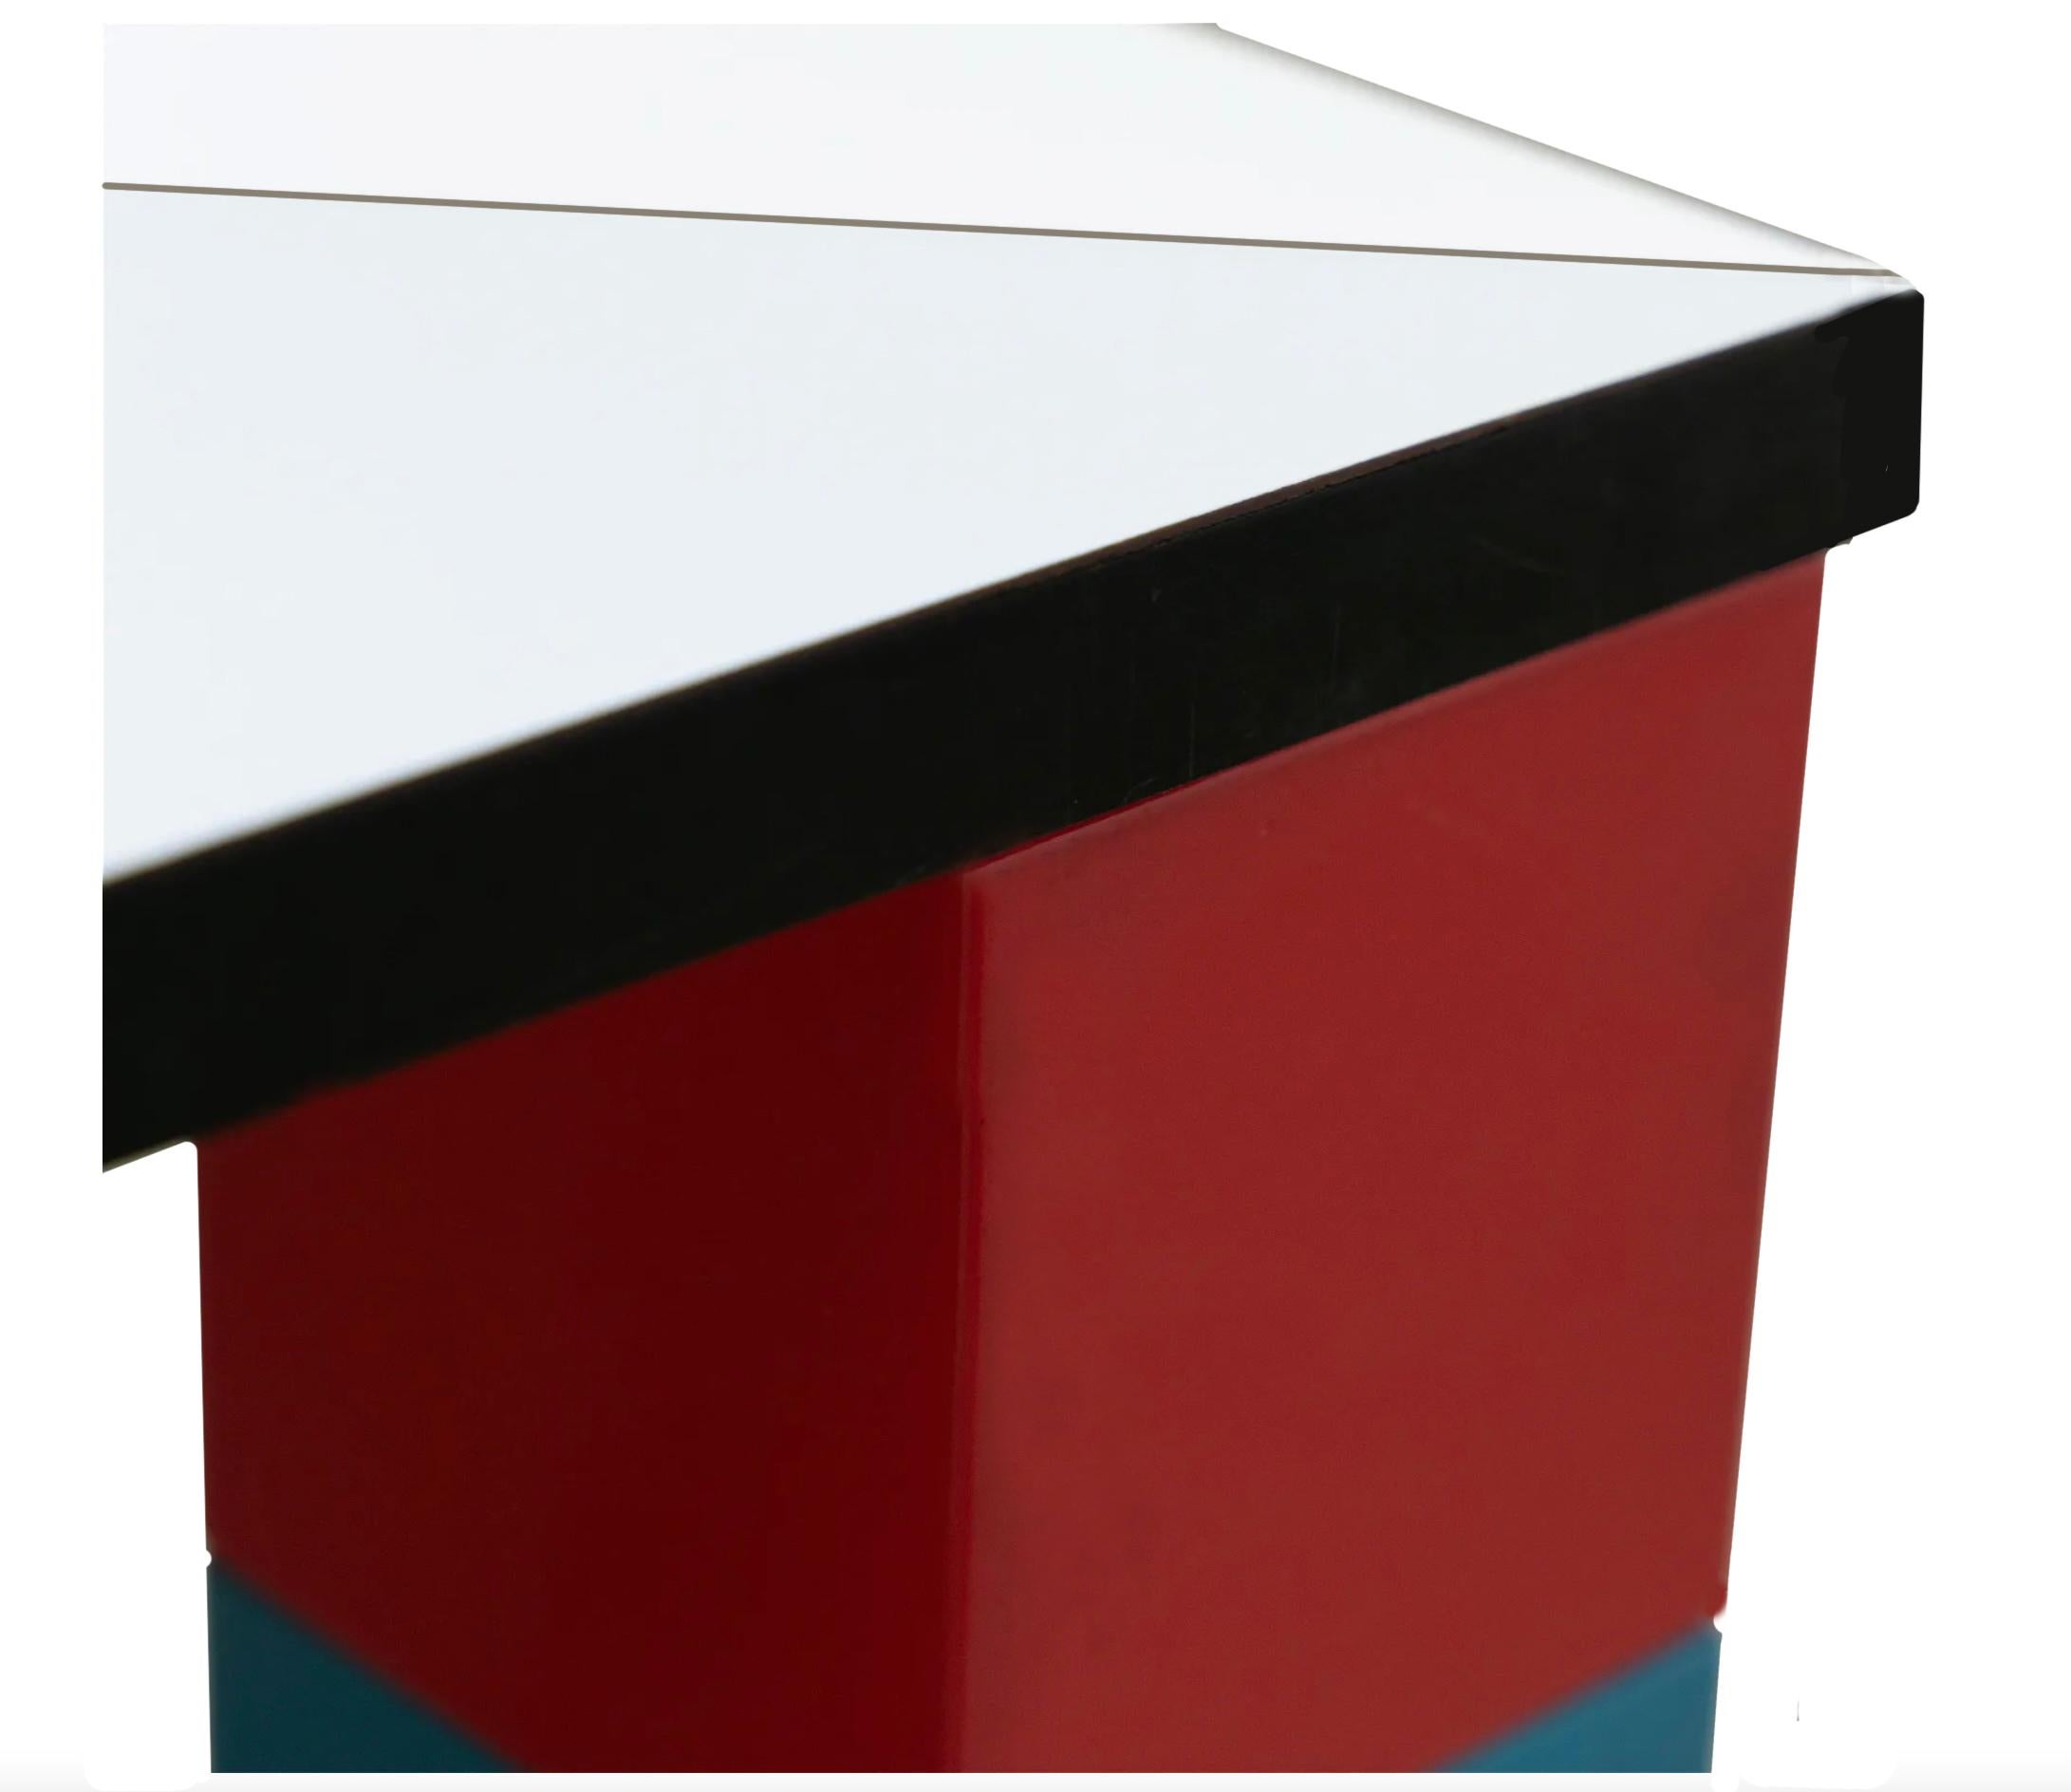 Italian Colorful Post modern George Sowden Square Dining table Zig Zag Laminate top 1981 For Sale